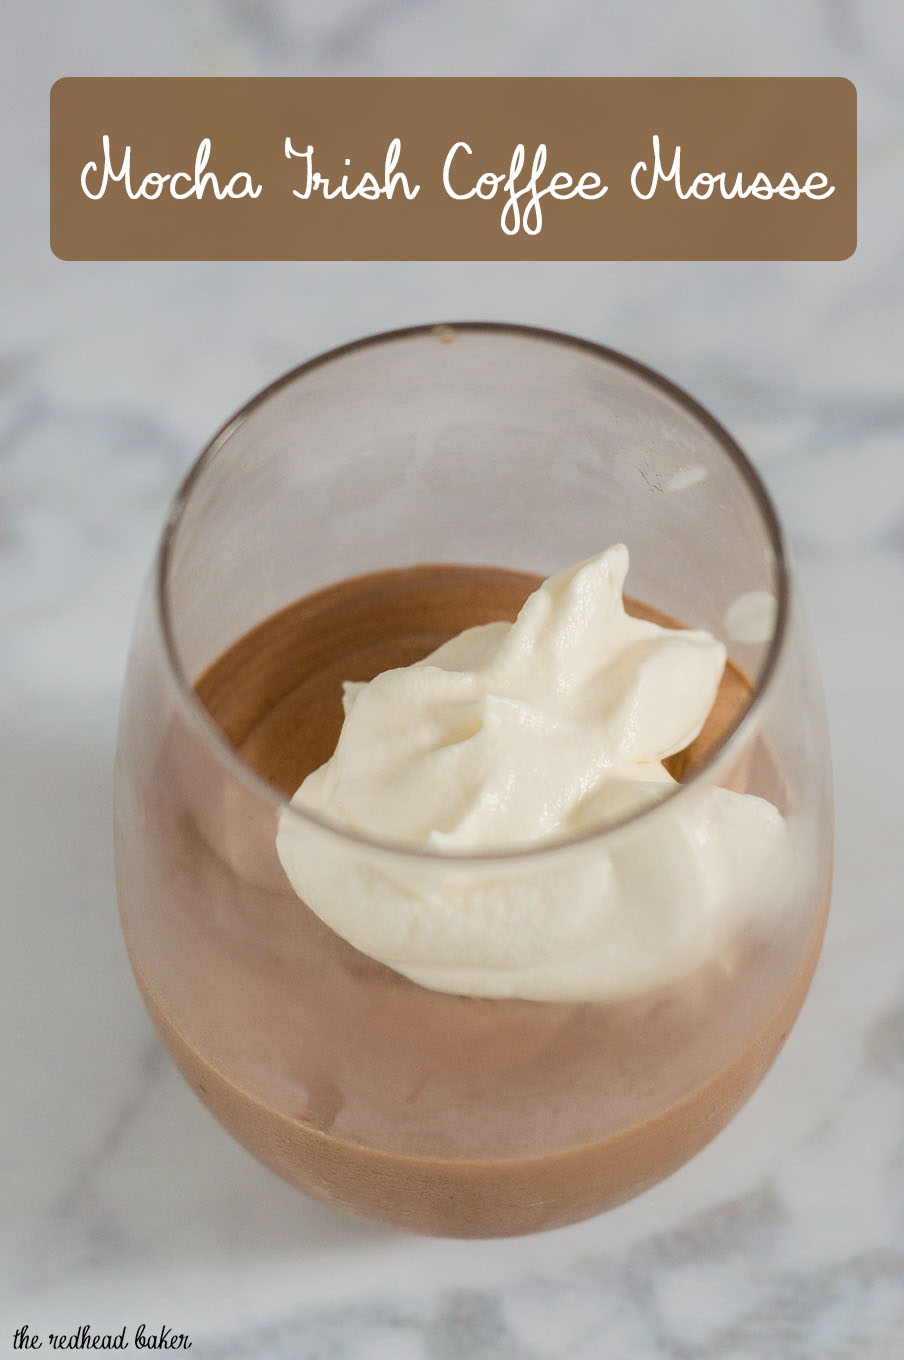 Irish Coffee Chocolate Mousse is flavored with whole coffee beans, semisweet chocolate and Irish cream liqueur. It is light in texture but rich in flavor. #Choctoberfest